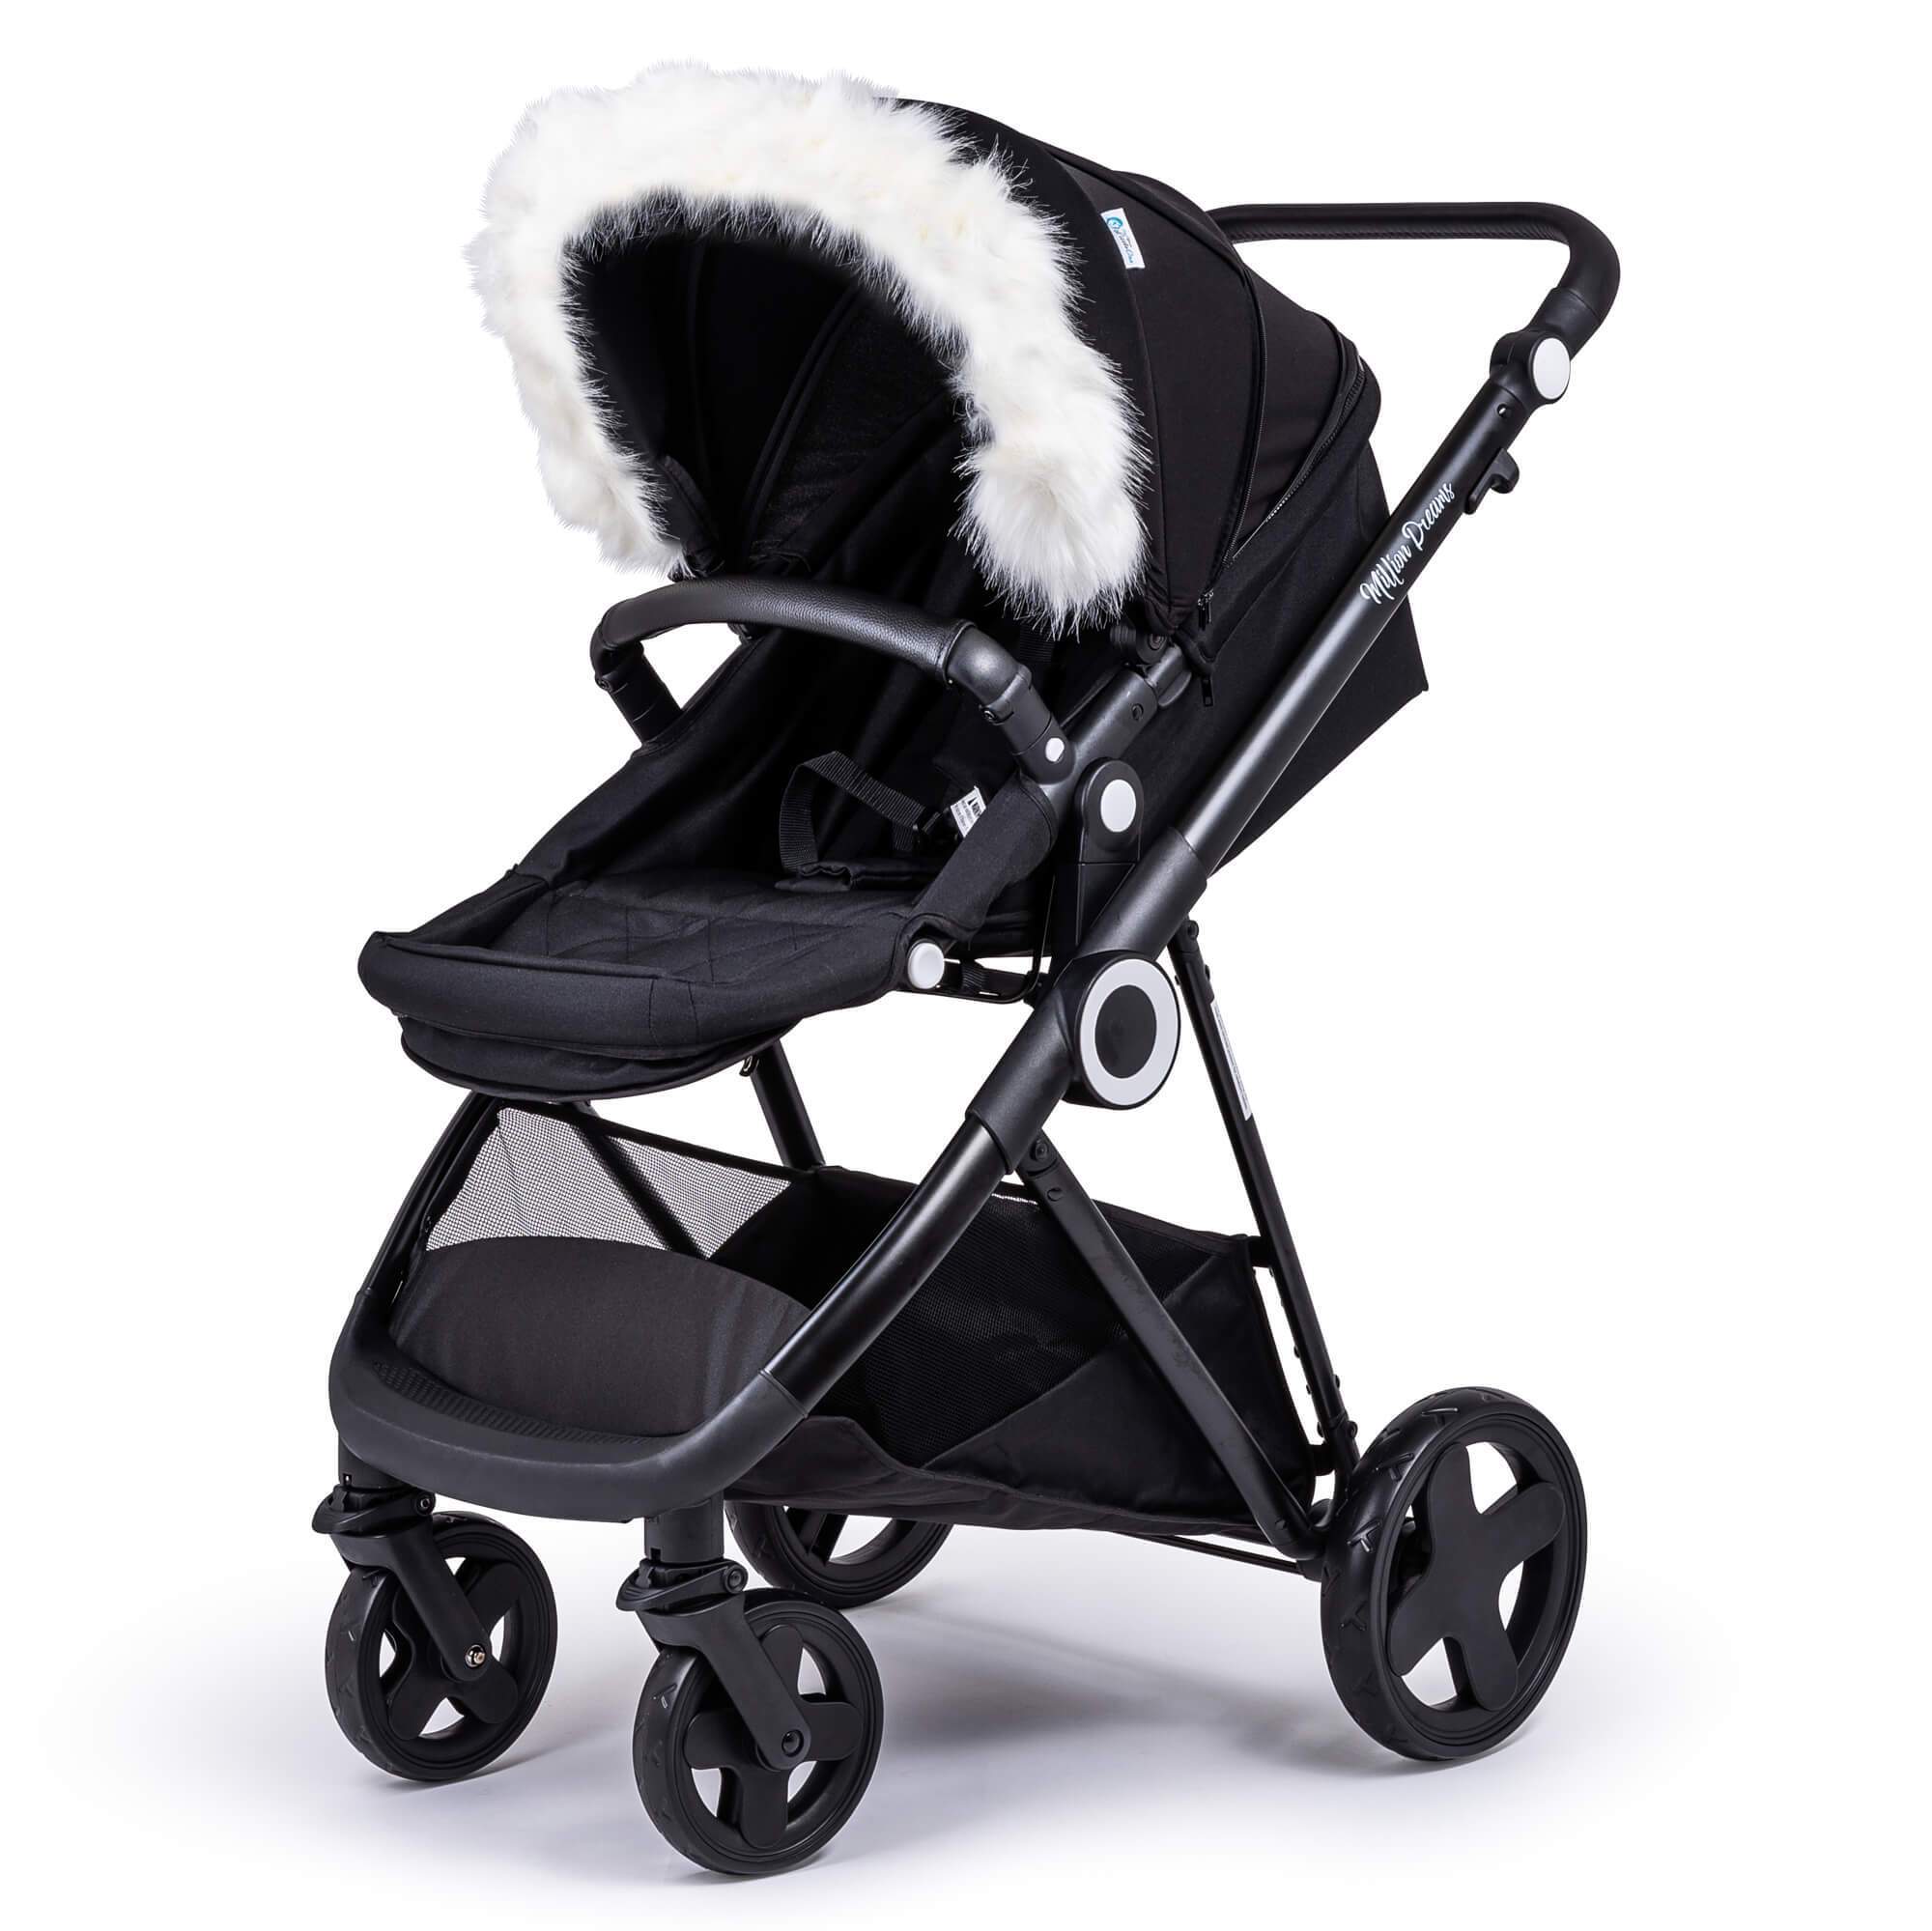 Pram Fur Hood Trim Attachment For Pushchair Compatible with Kids Kargo - White / Fits All Models | For Your Little One